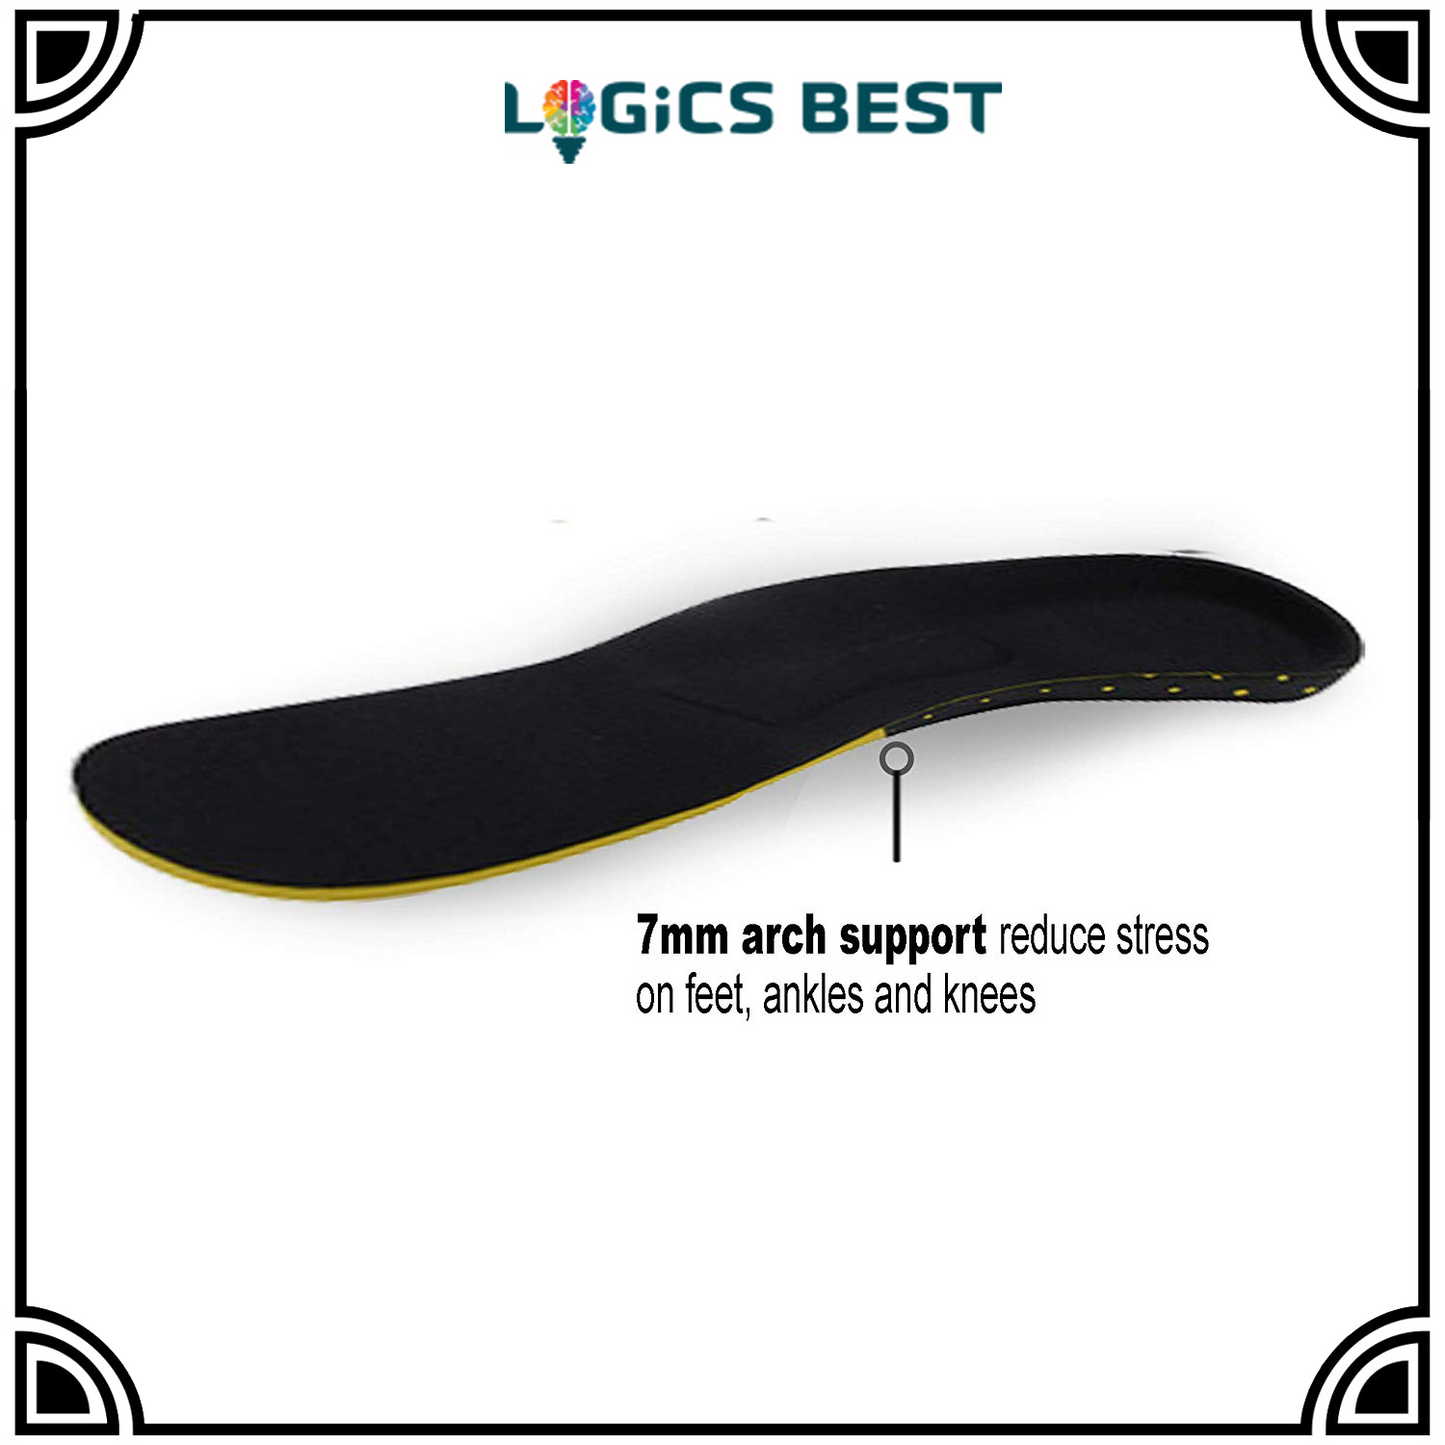 Plantar Fasciitis Flat Feet Insoles Arch Supports Orthotics Relieve High Arch, Foot, Heel Pain (US Mens 6.5-9 Womens 8-11.5)